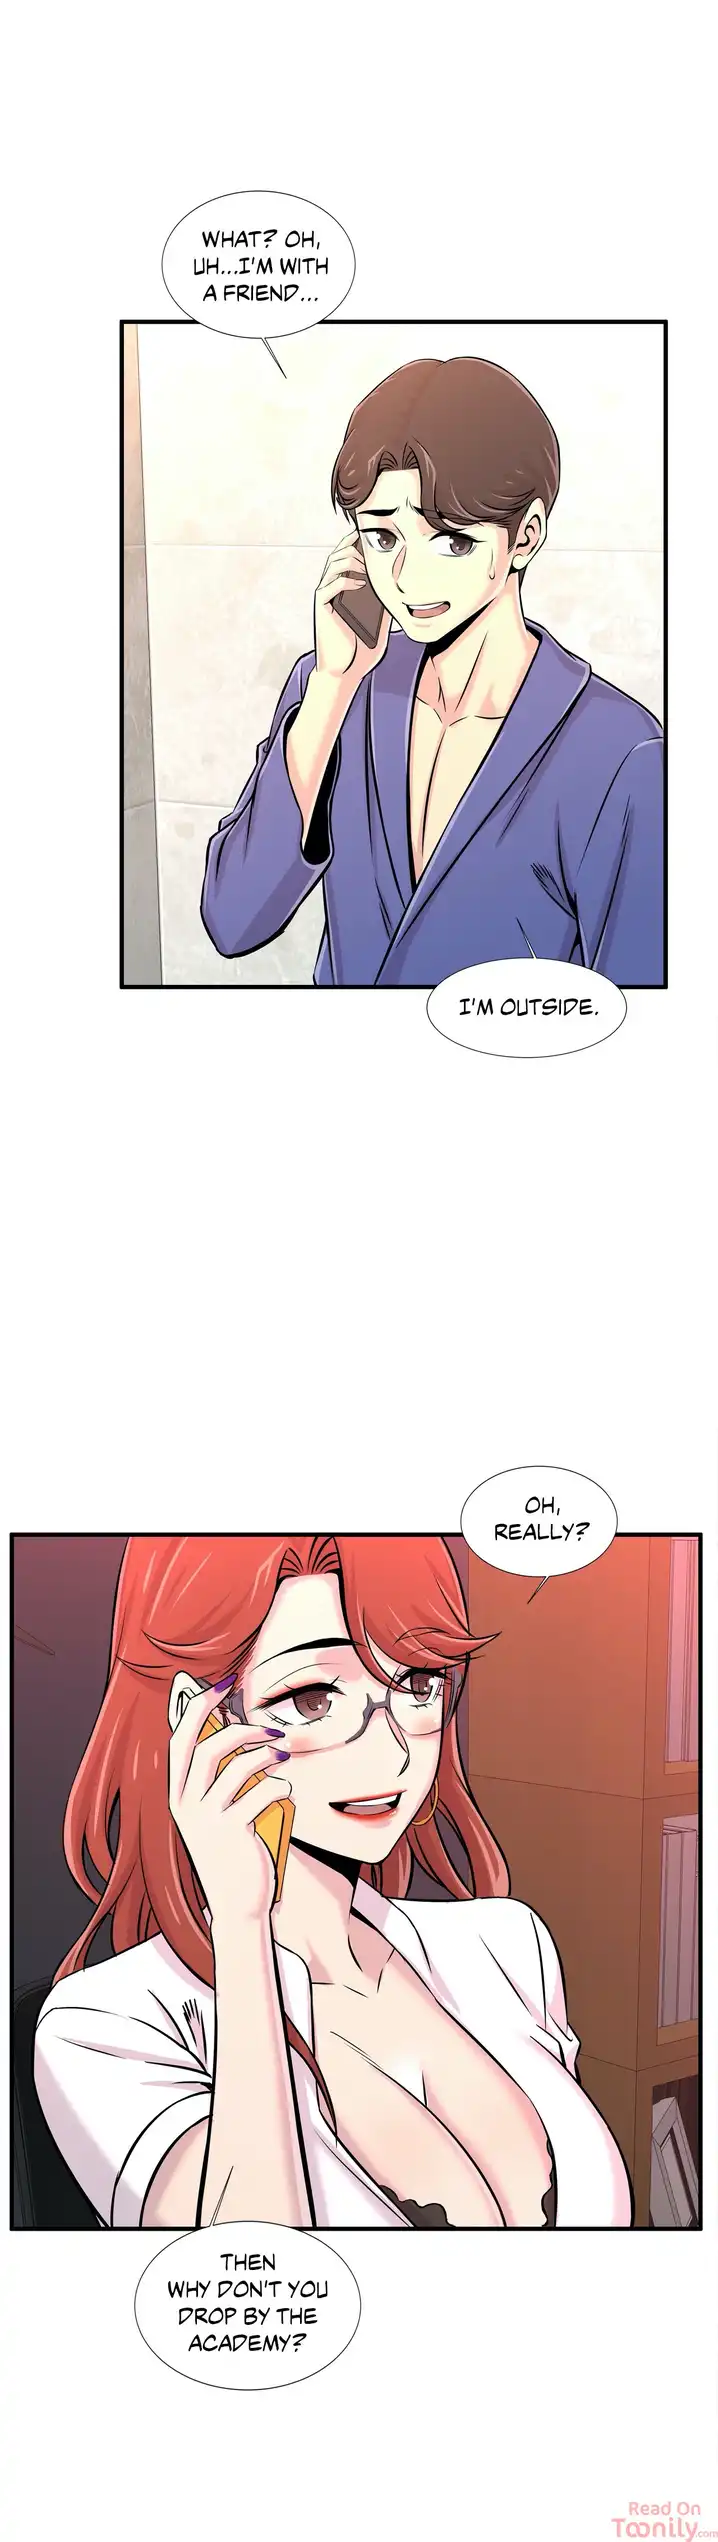 Cram School Scandal - Chapter 20 Page 2